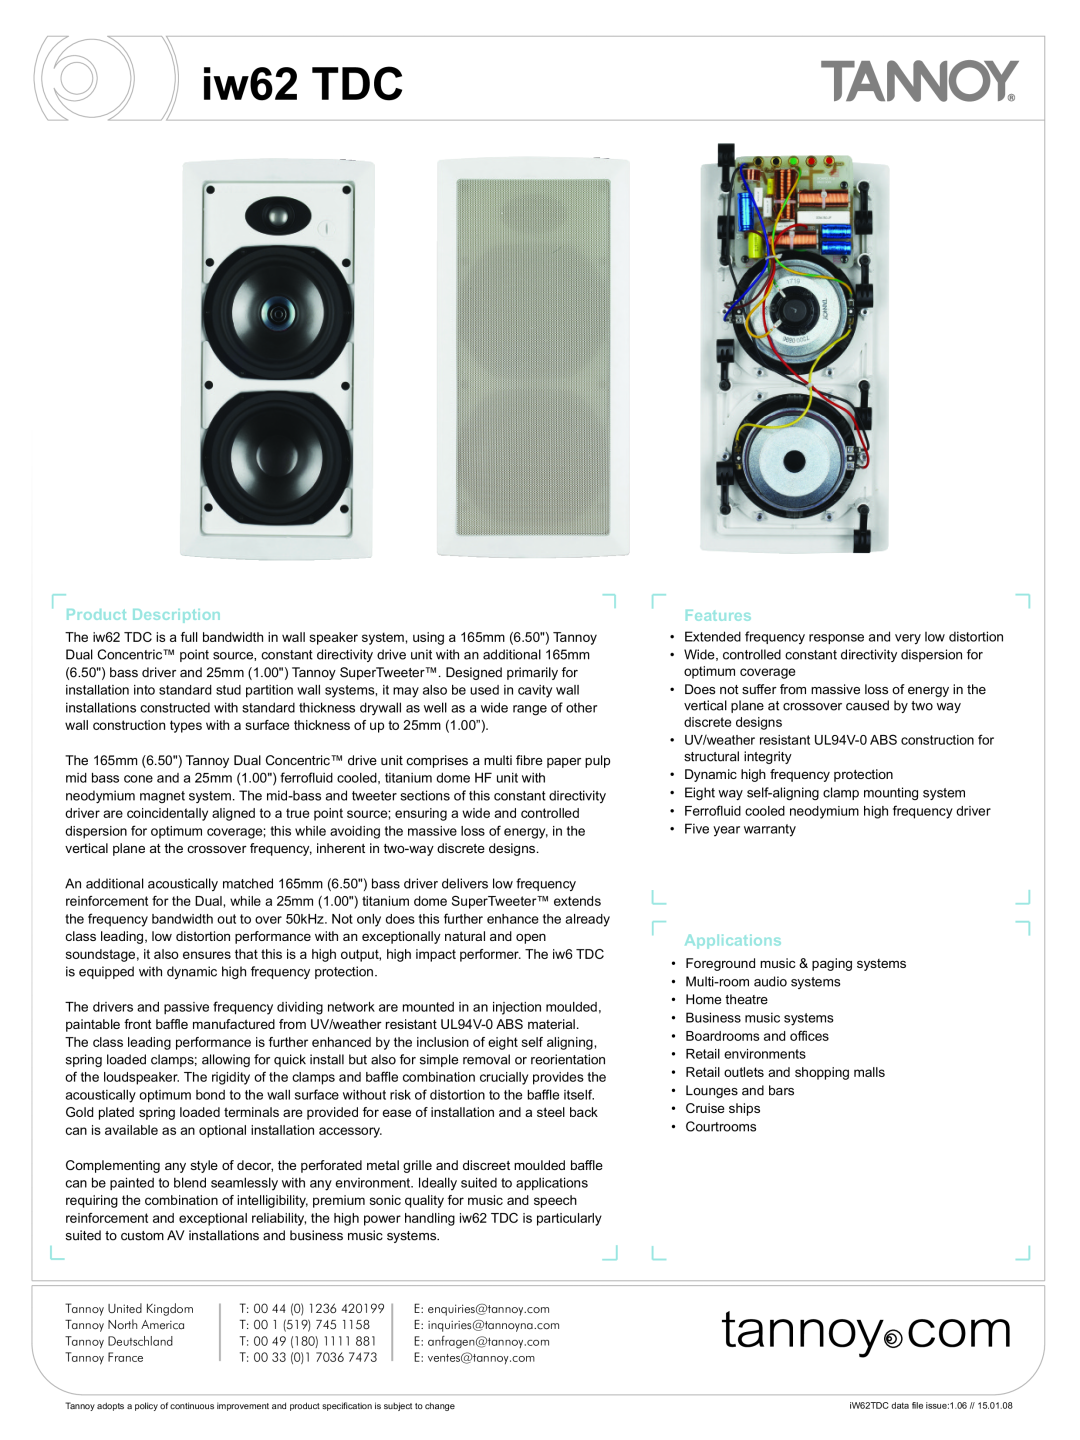 Tannoy iw62 TDC warranty Features, Applications 